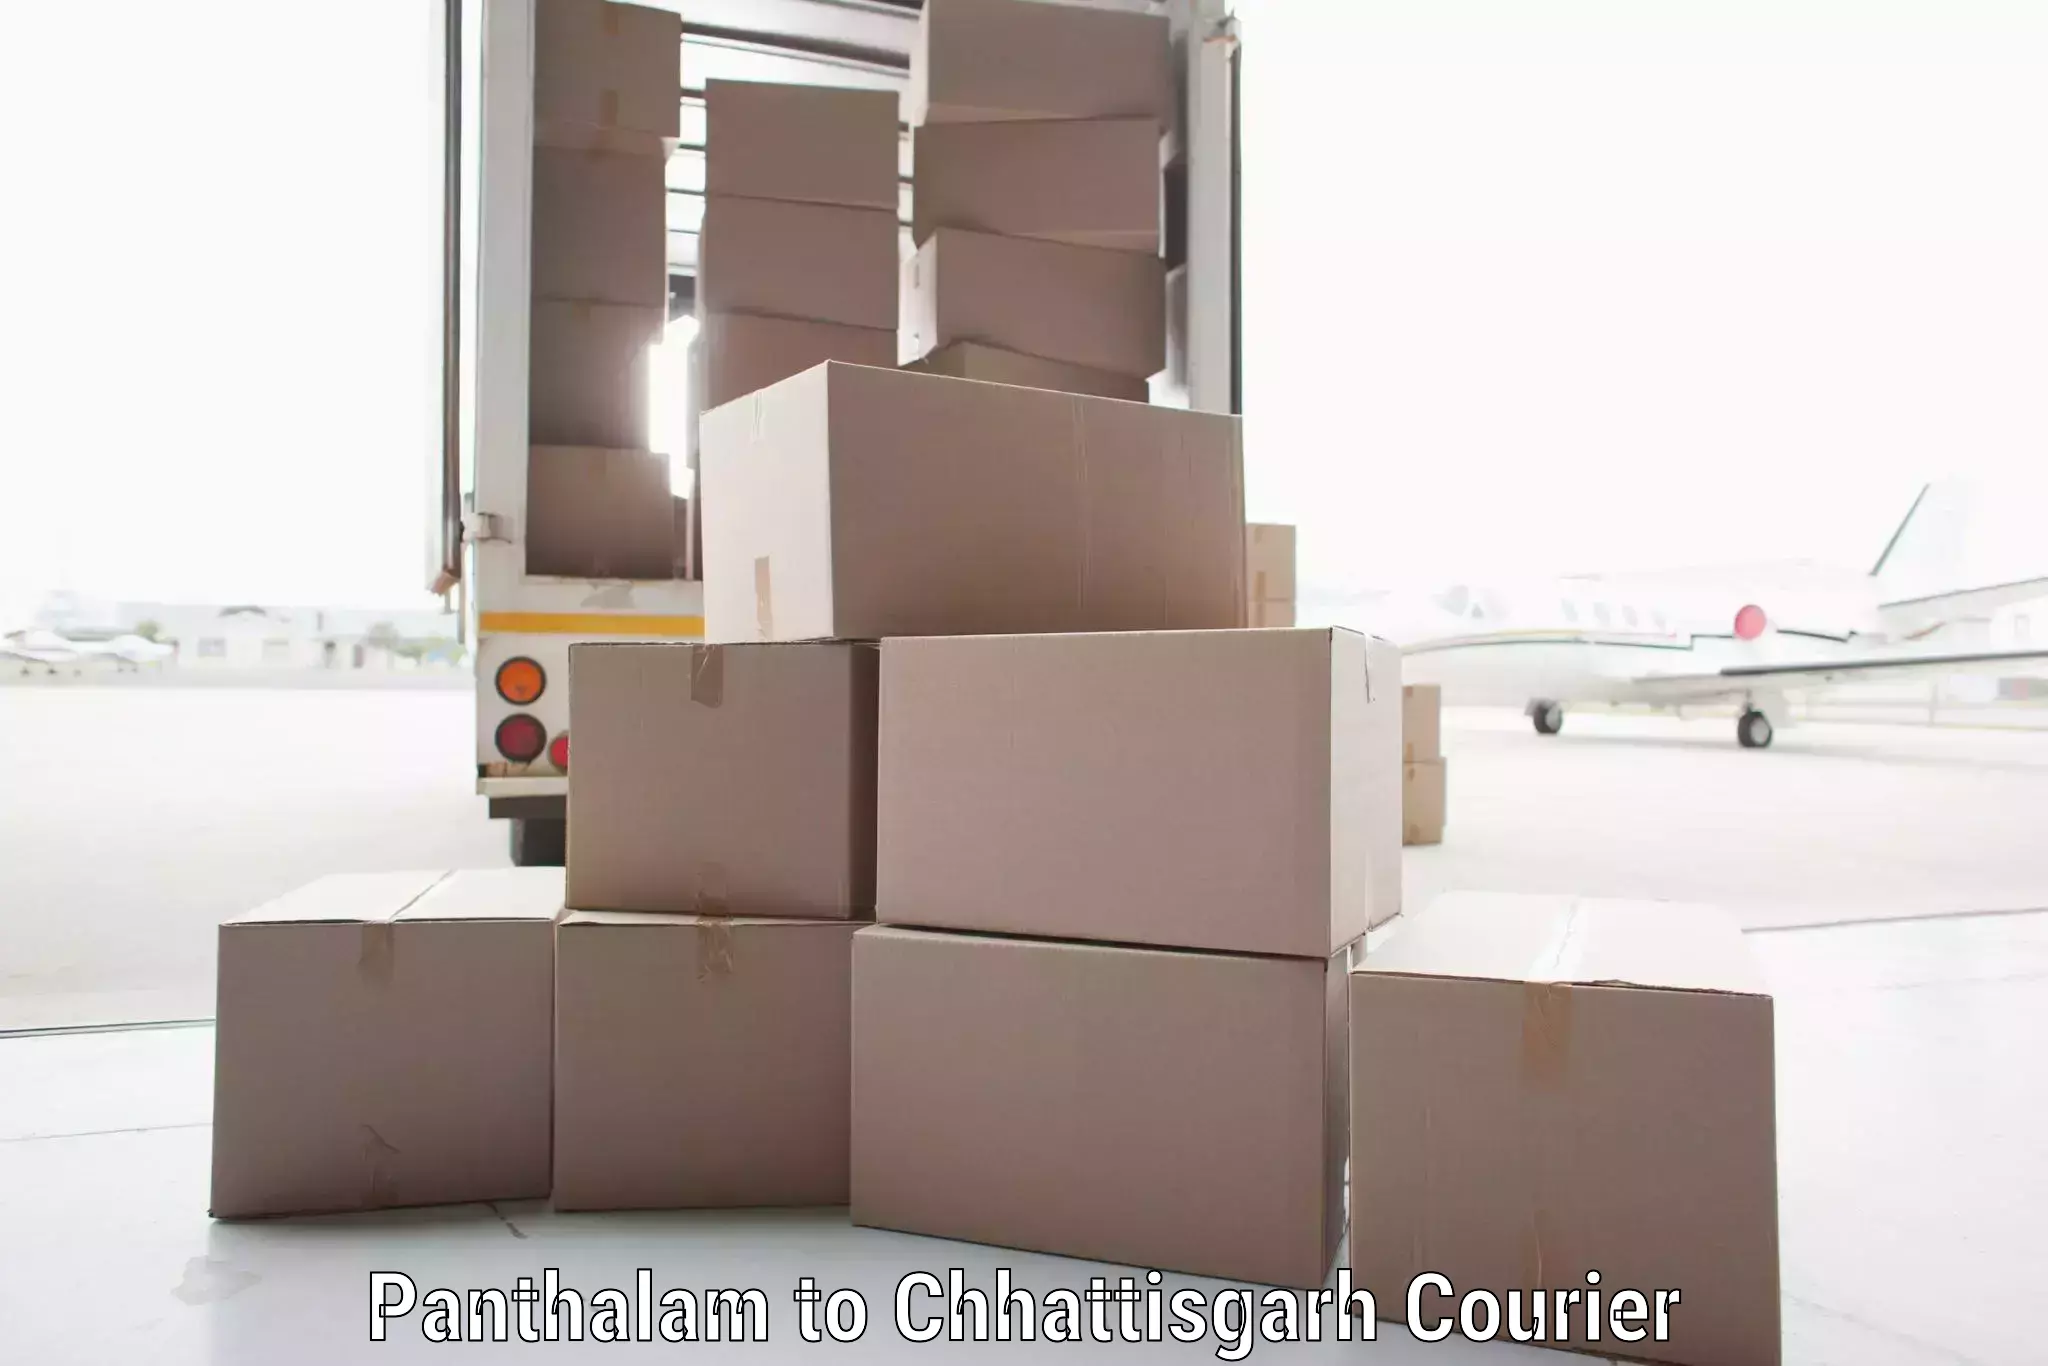 State-of-the-art courier technology Panthalam to Mandhar